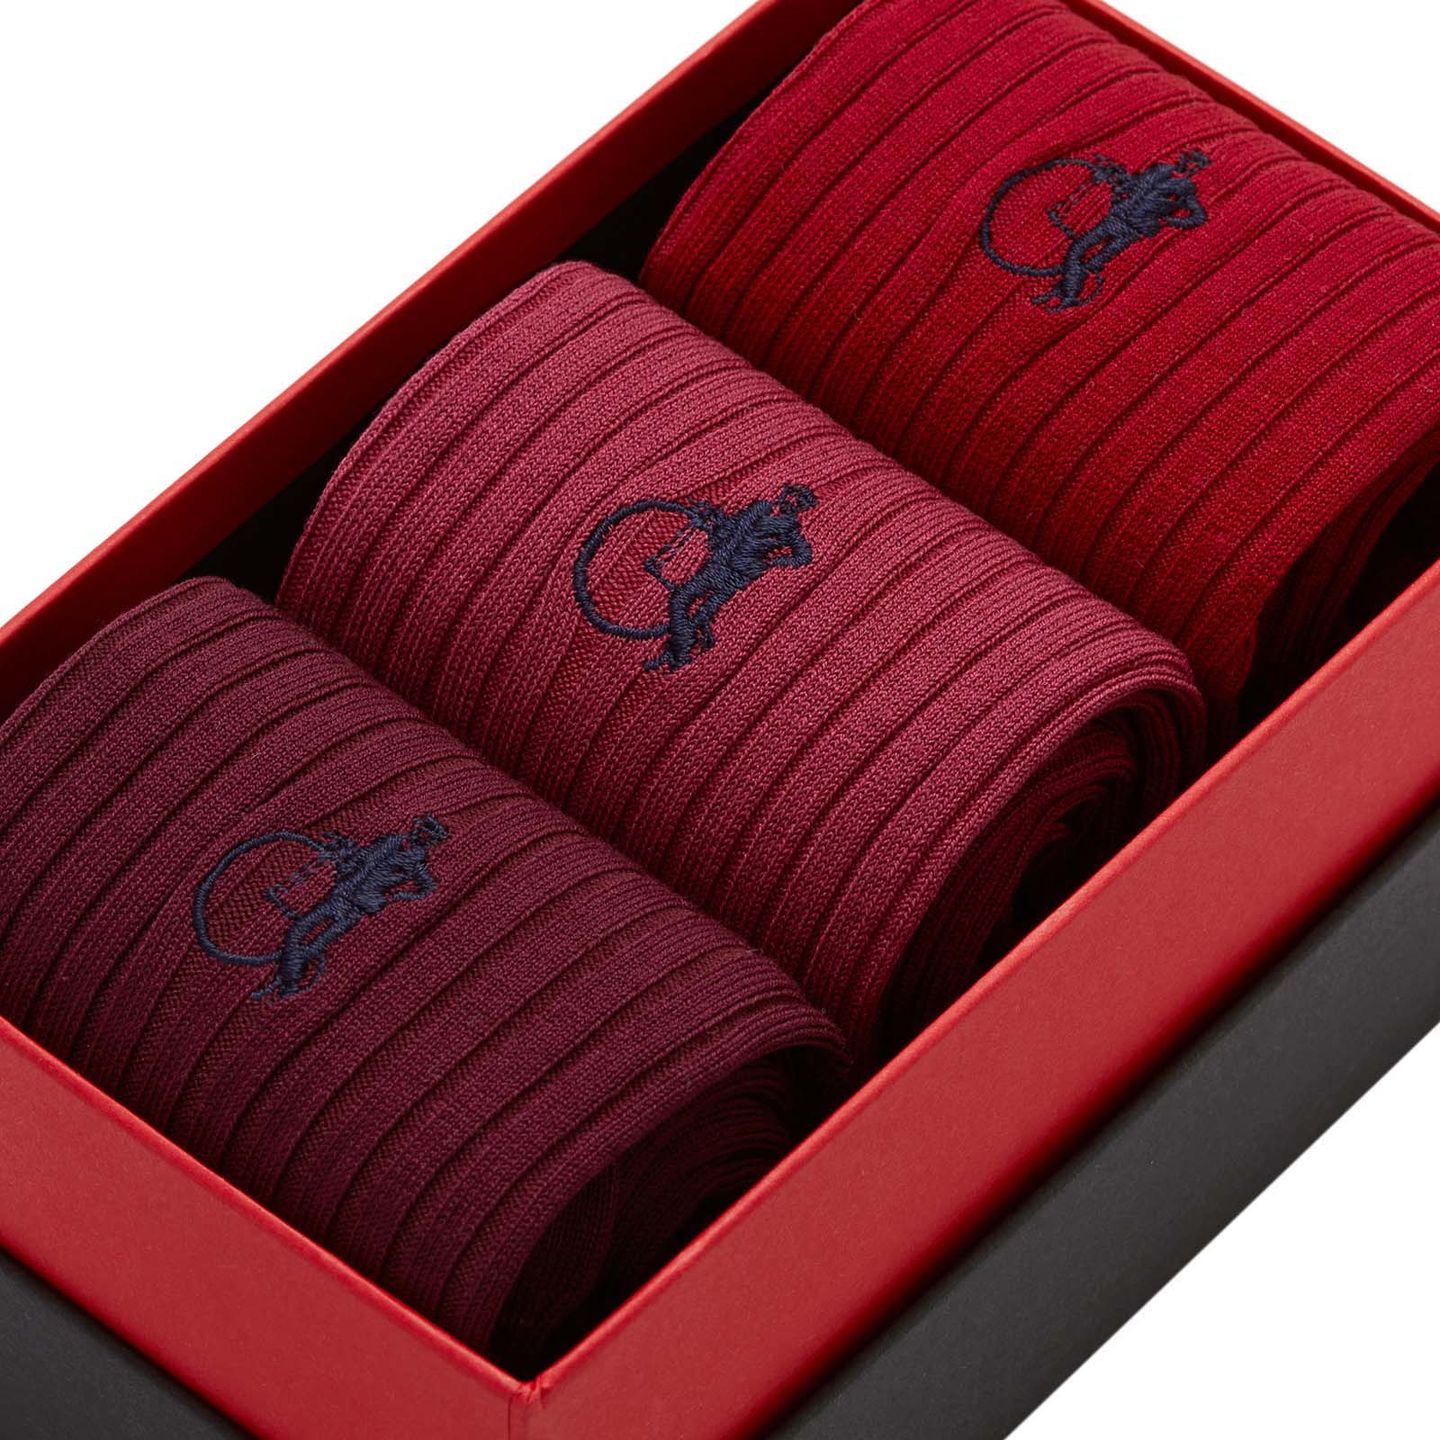 3 pair of red socks in a box